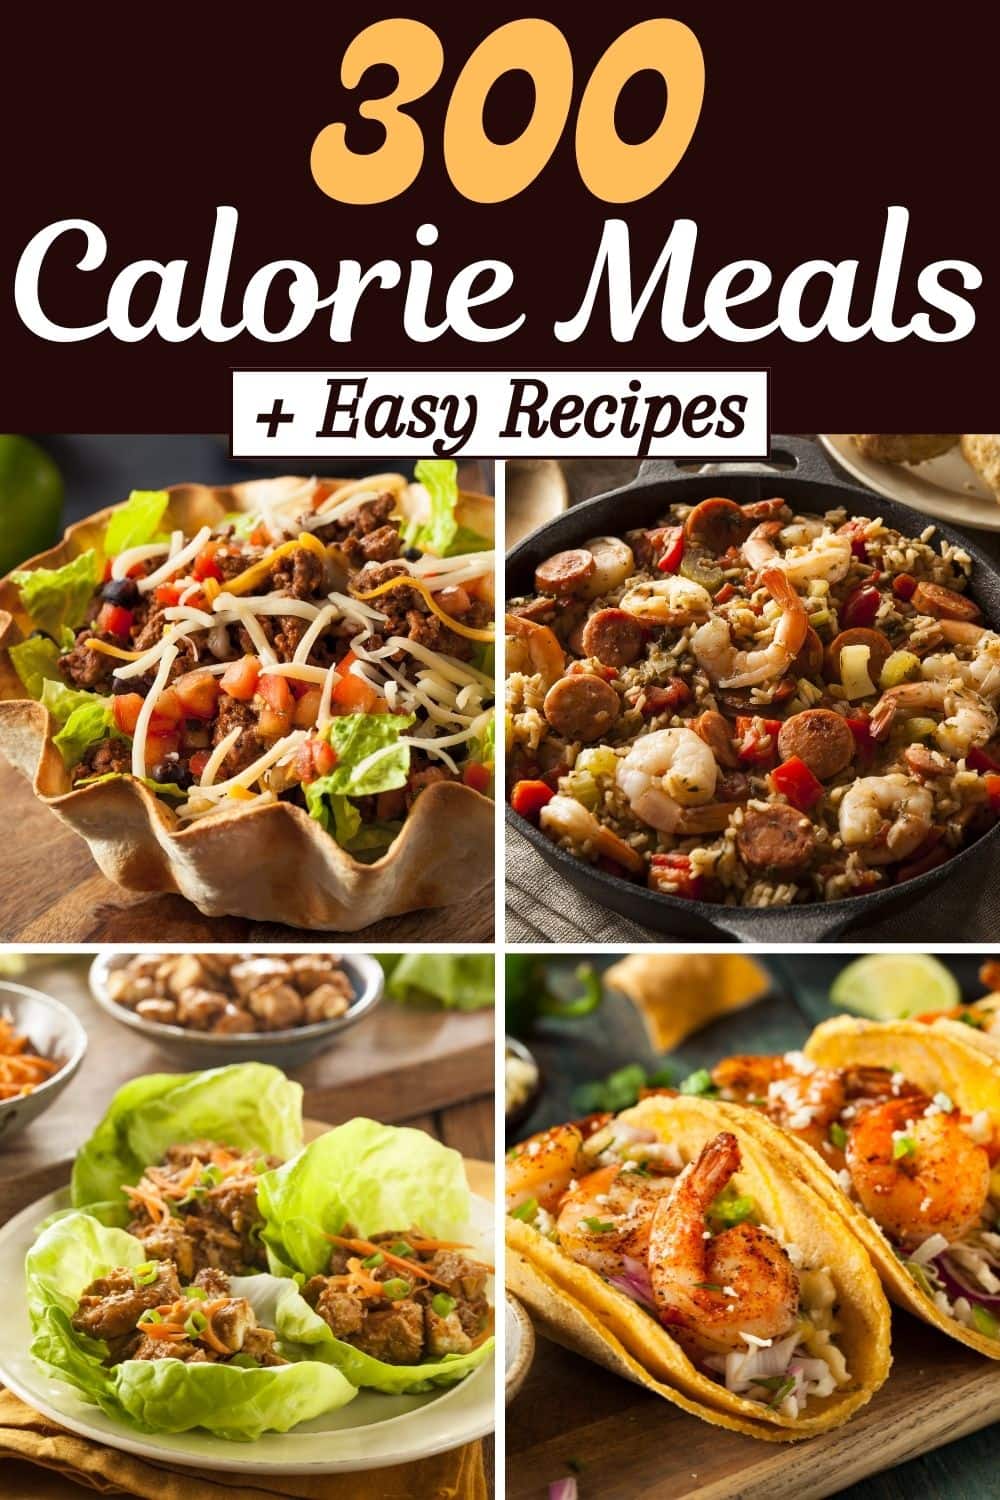 300 Calorie Meals (+ Easy Recipes) - Insanely Good